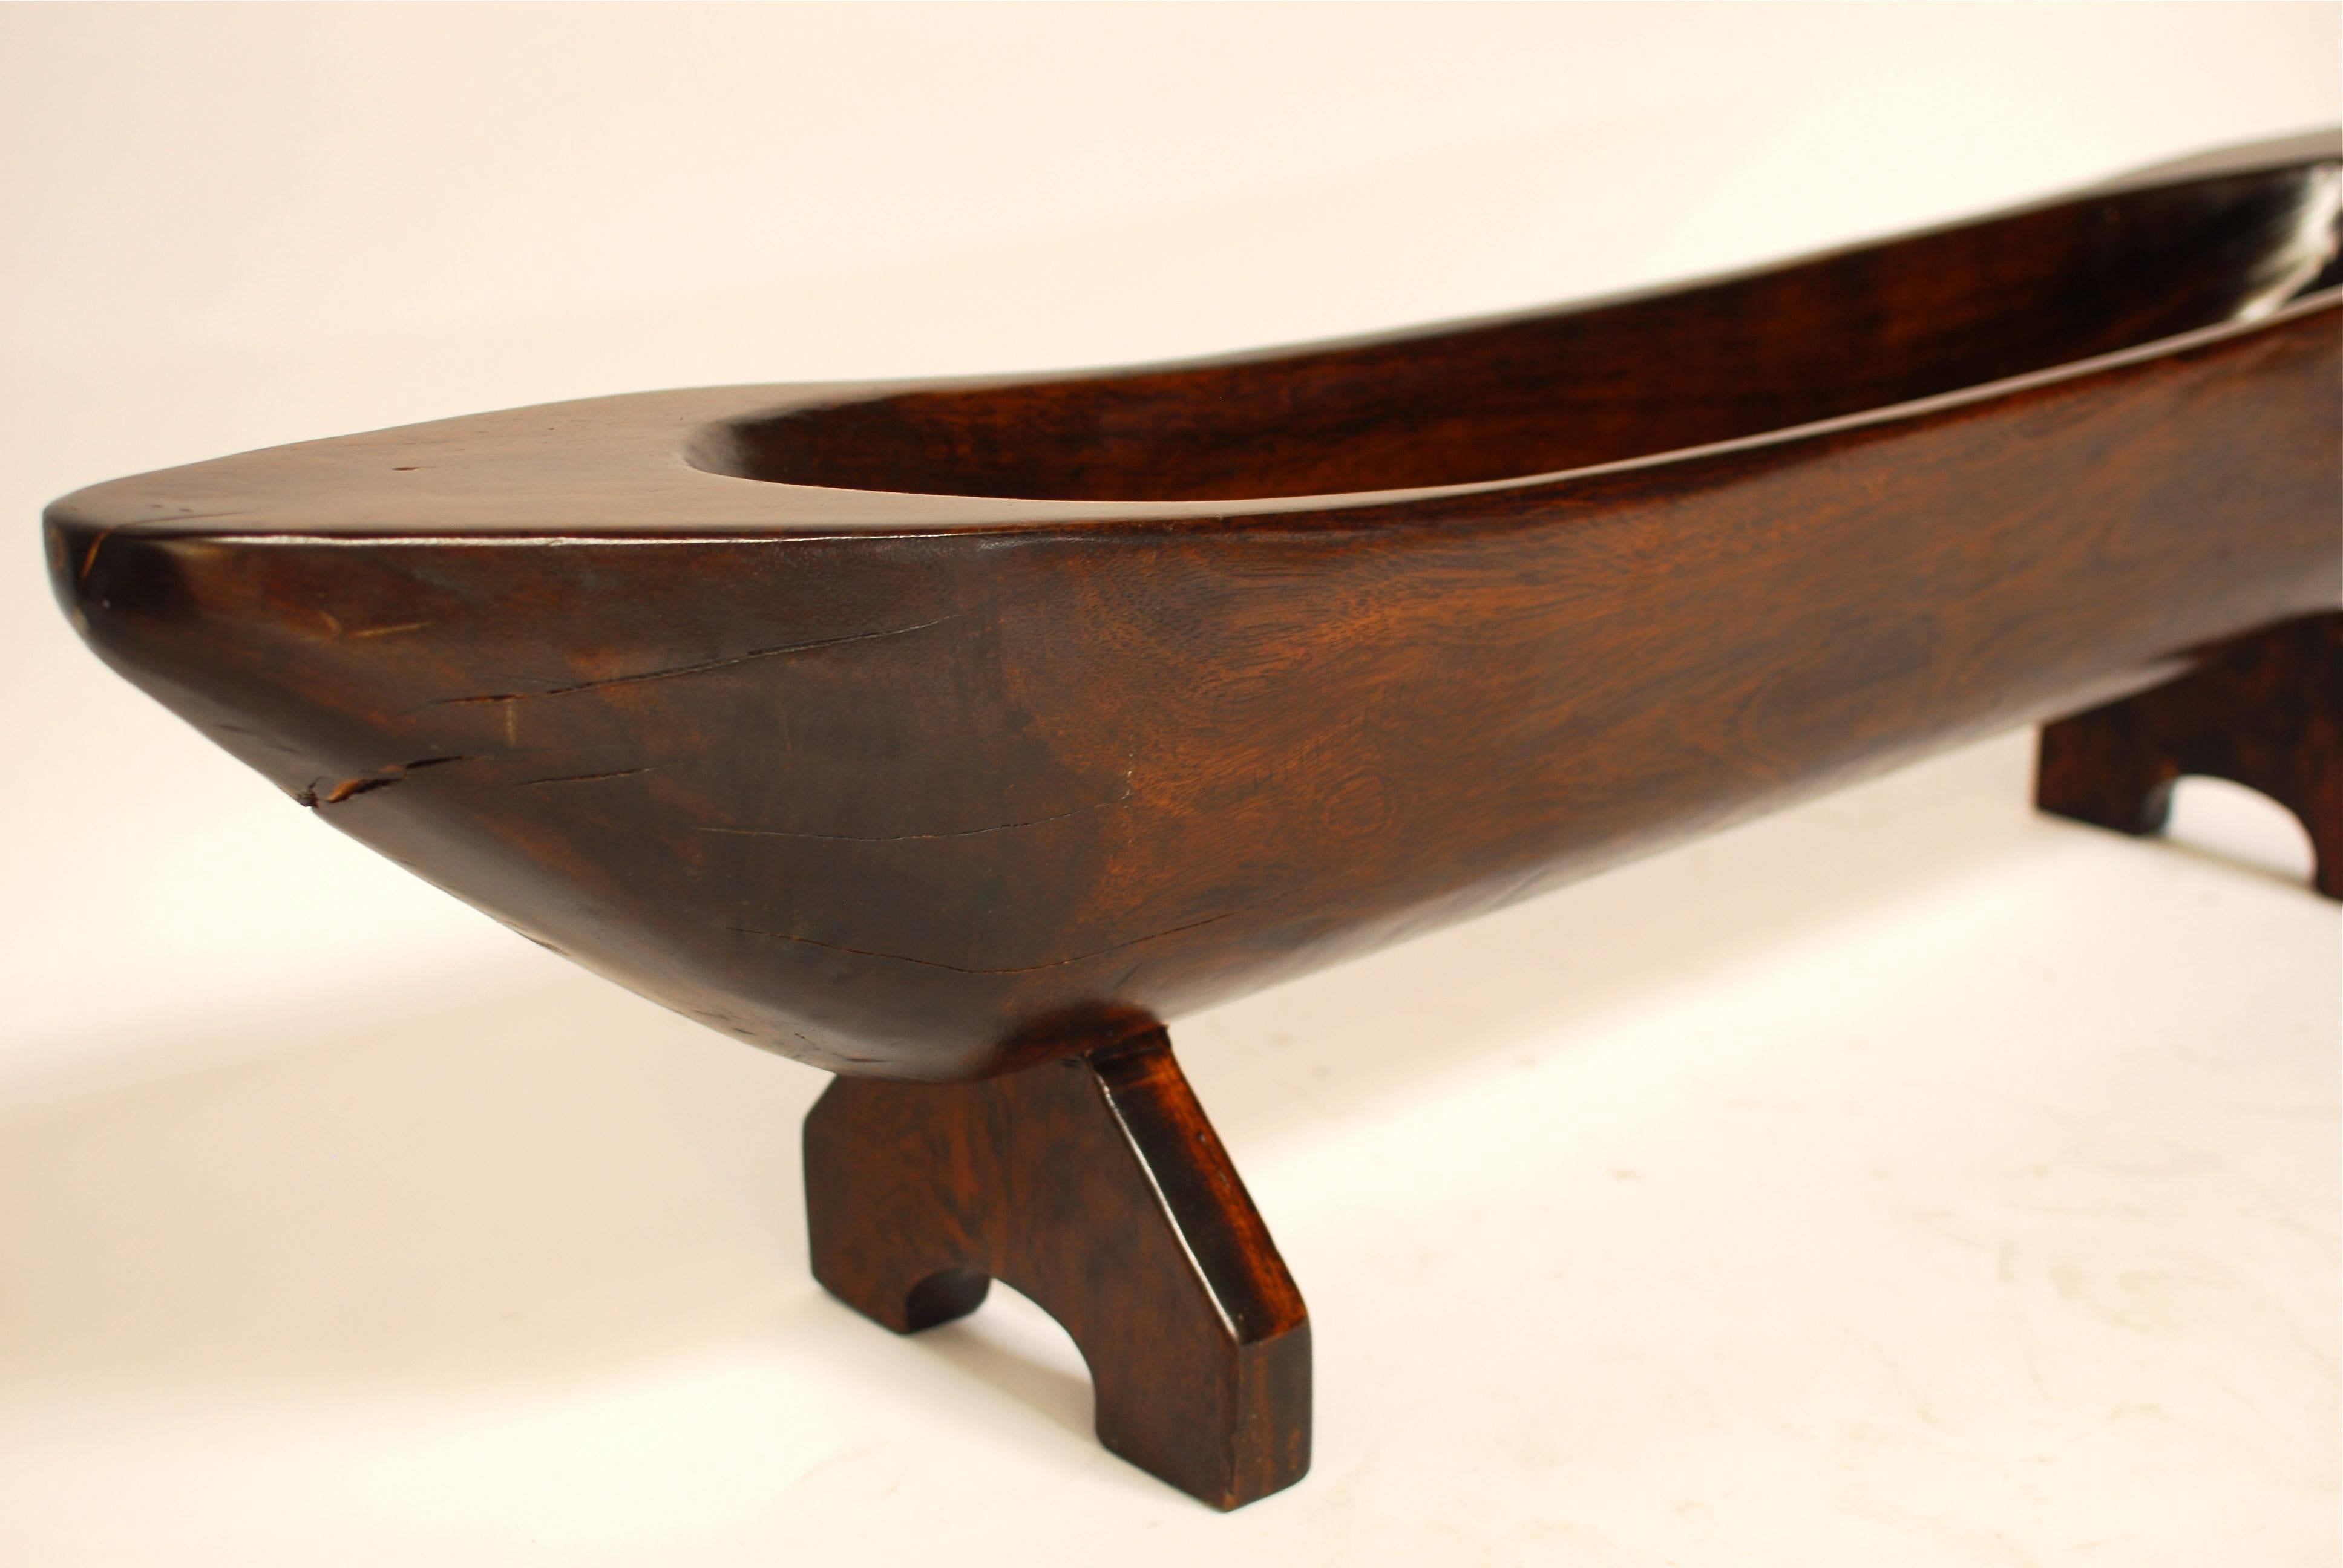 Monumental vintage carved wood display centerpiece of a large nautical shaped trough on stand. This massive display piece could be used to hold bread or fruit on the kitchen table, or use it as a sculptural piece in any area of the house. Very